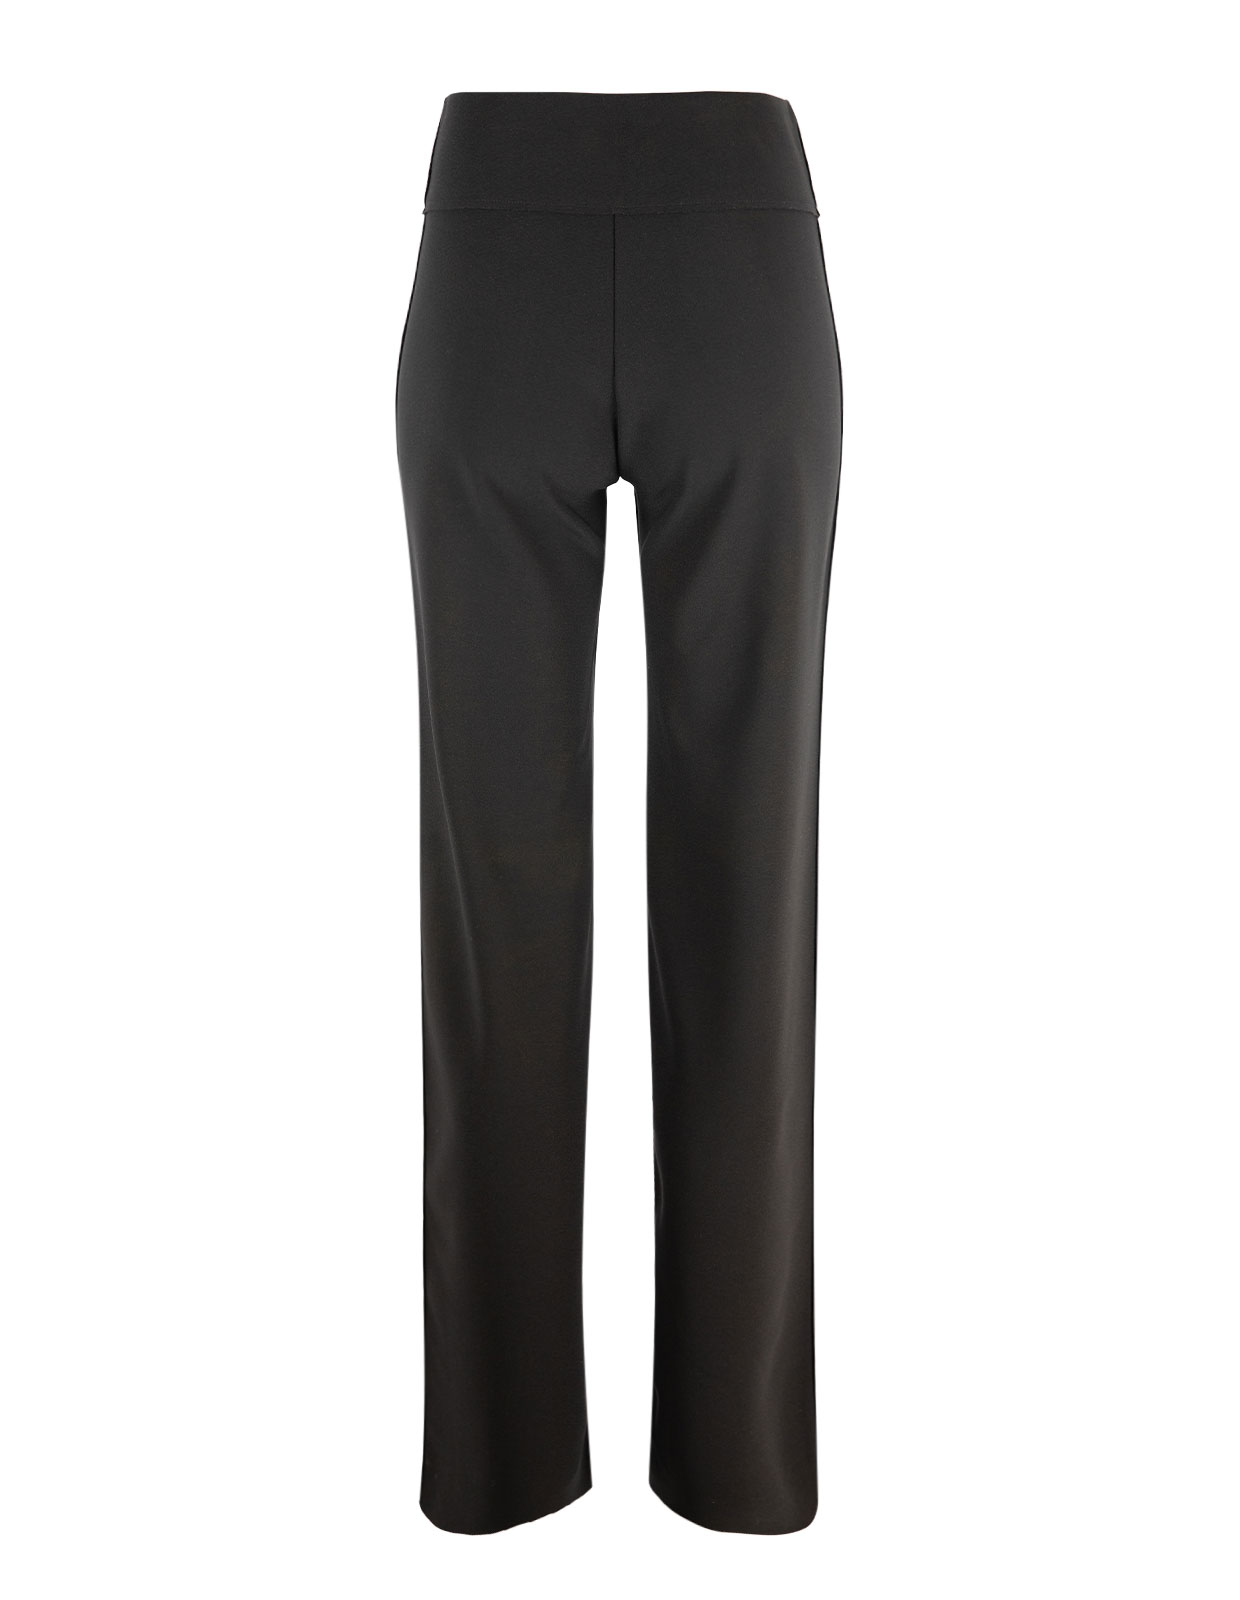 Angie Stretch Trousers Long Black